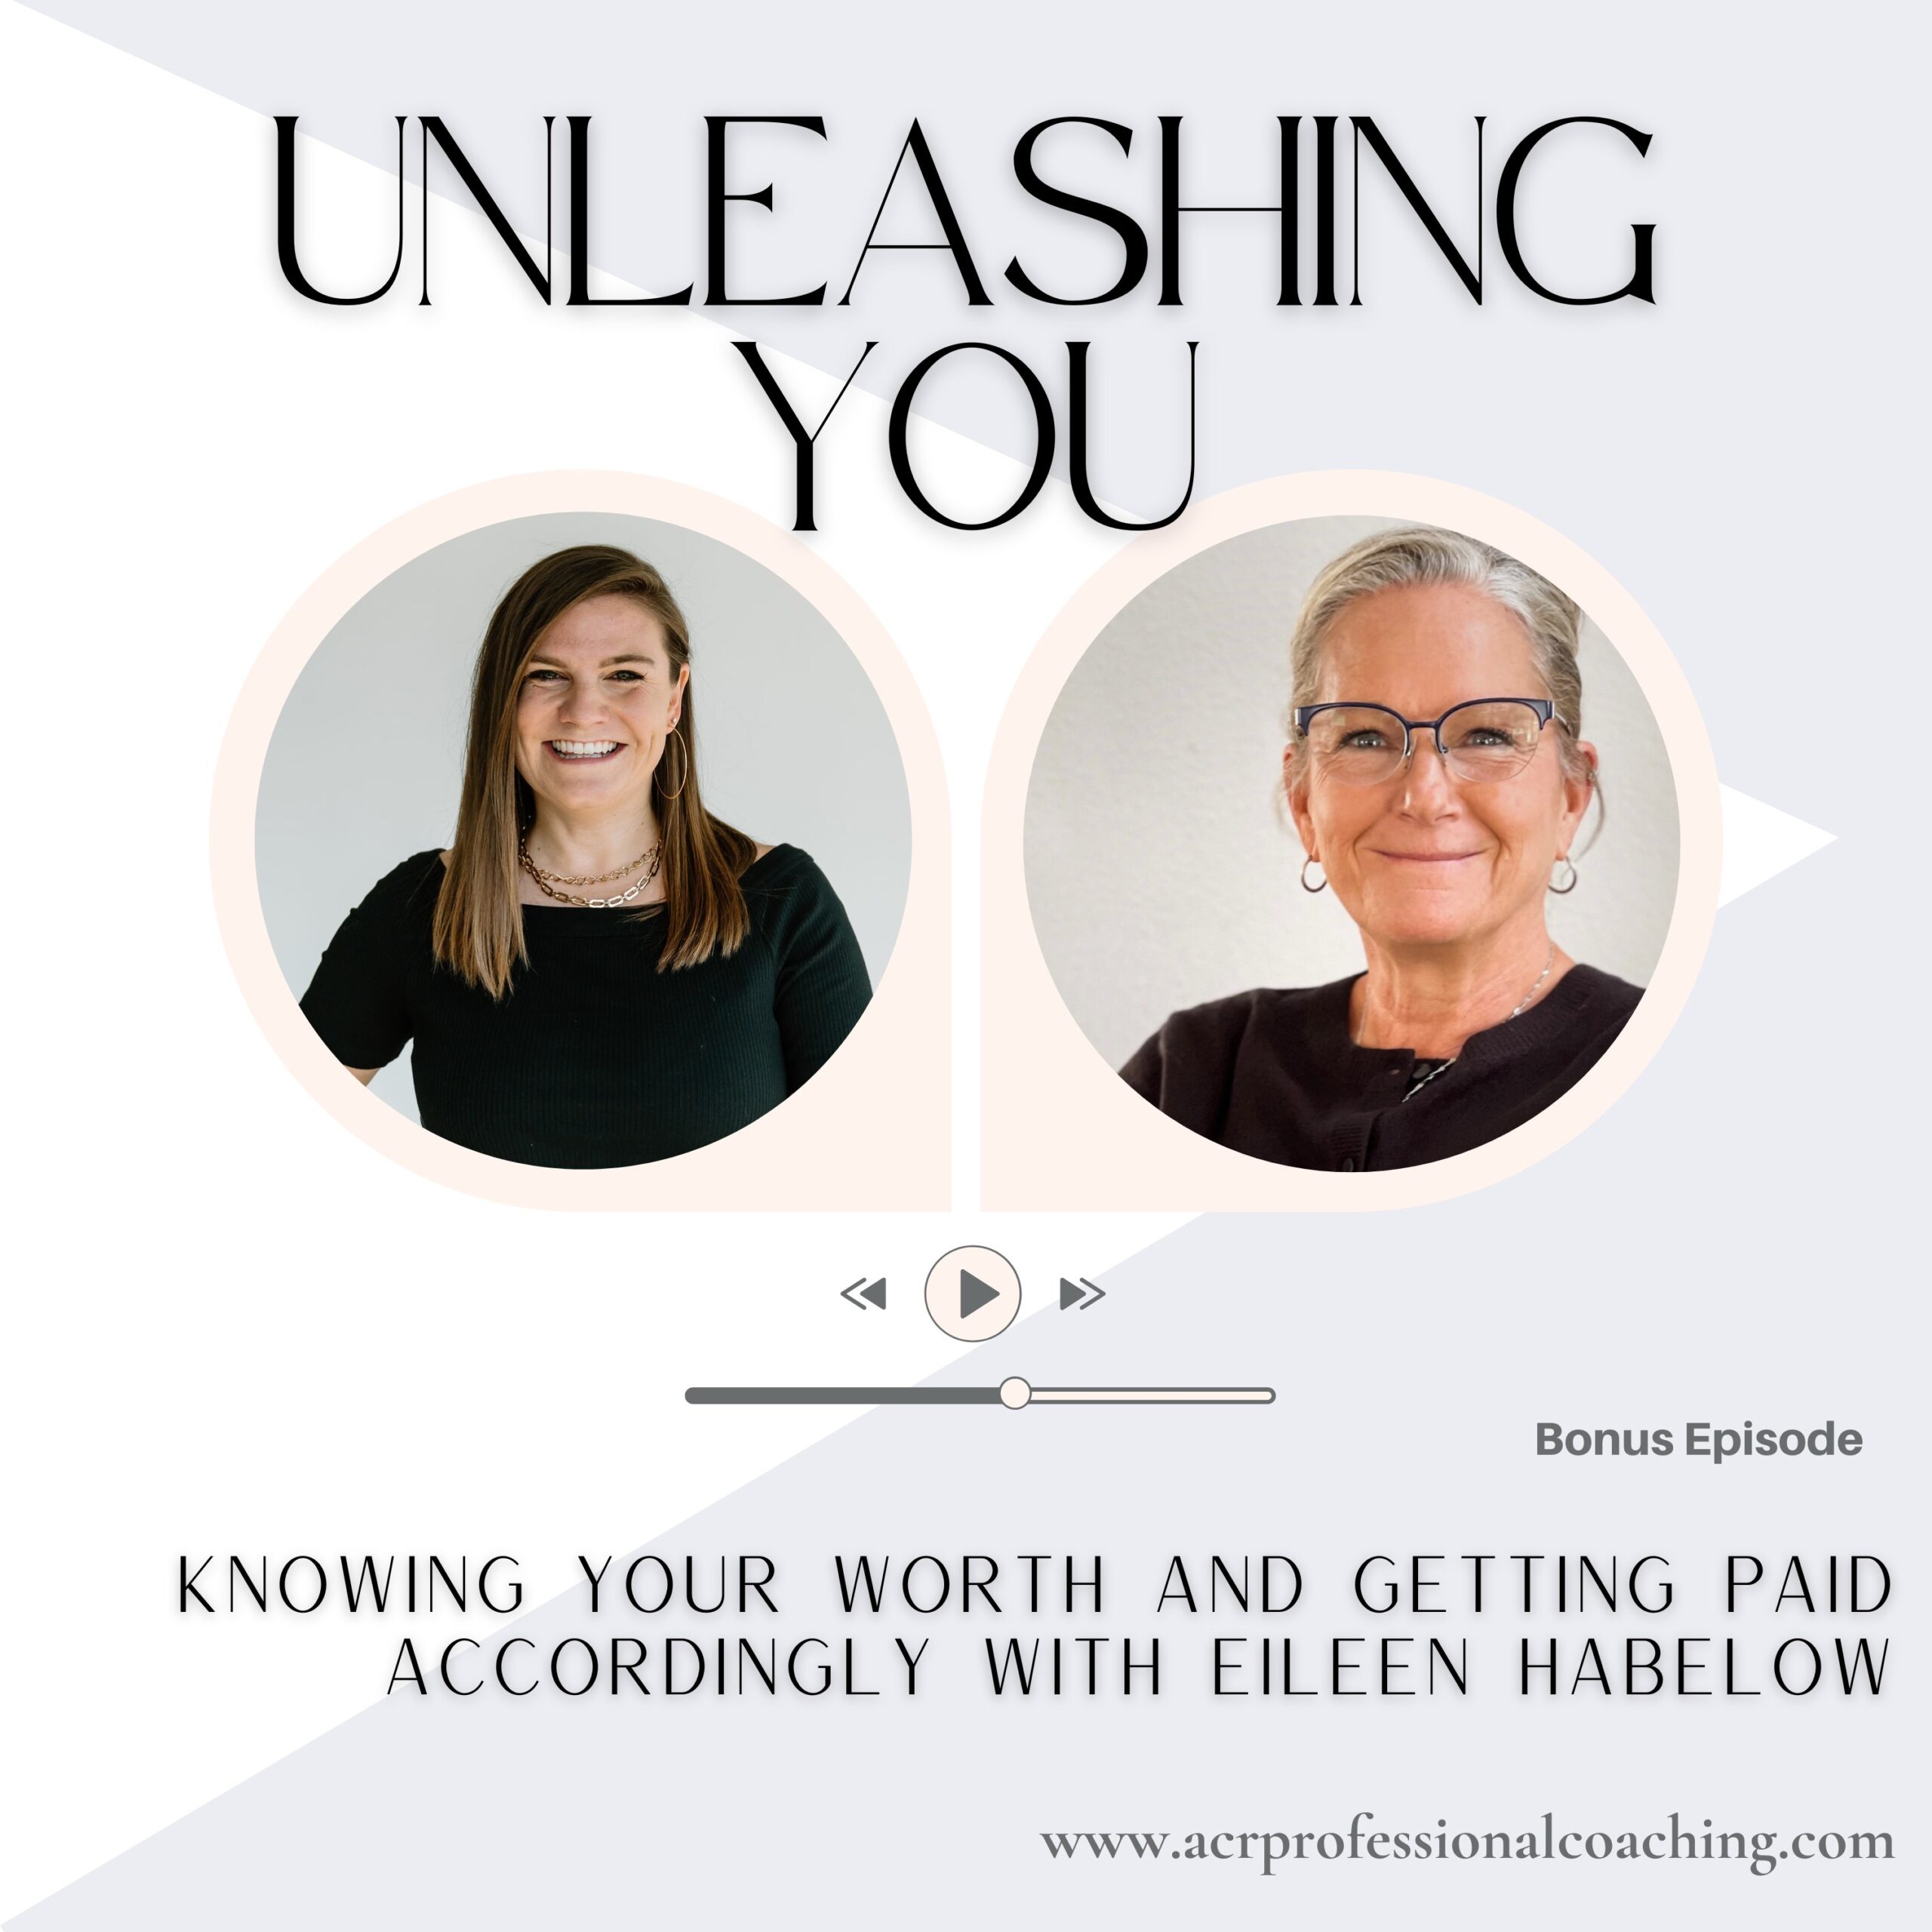 Knowing Your Worth and Getting Paid Accordingly with Eileen Habelow